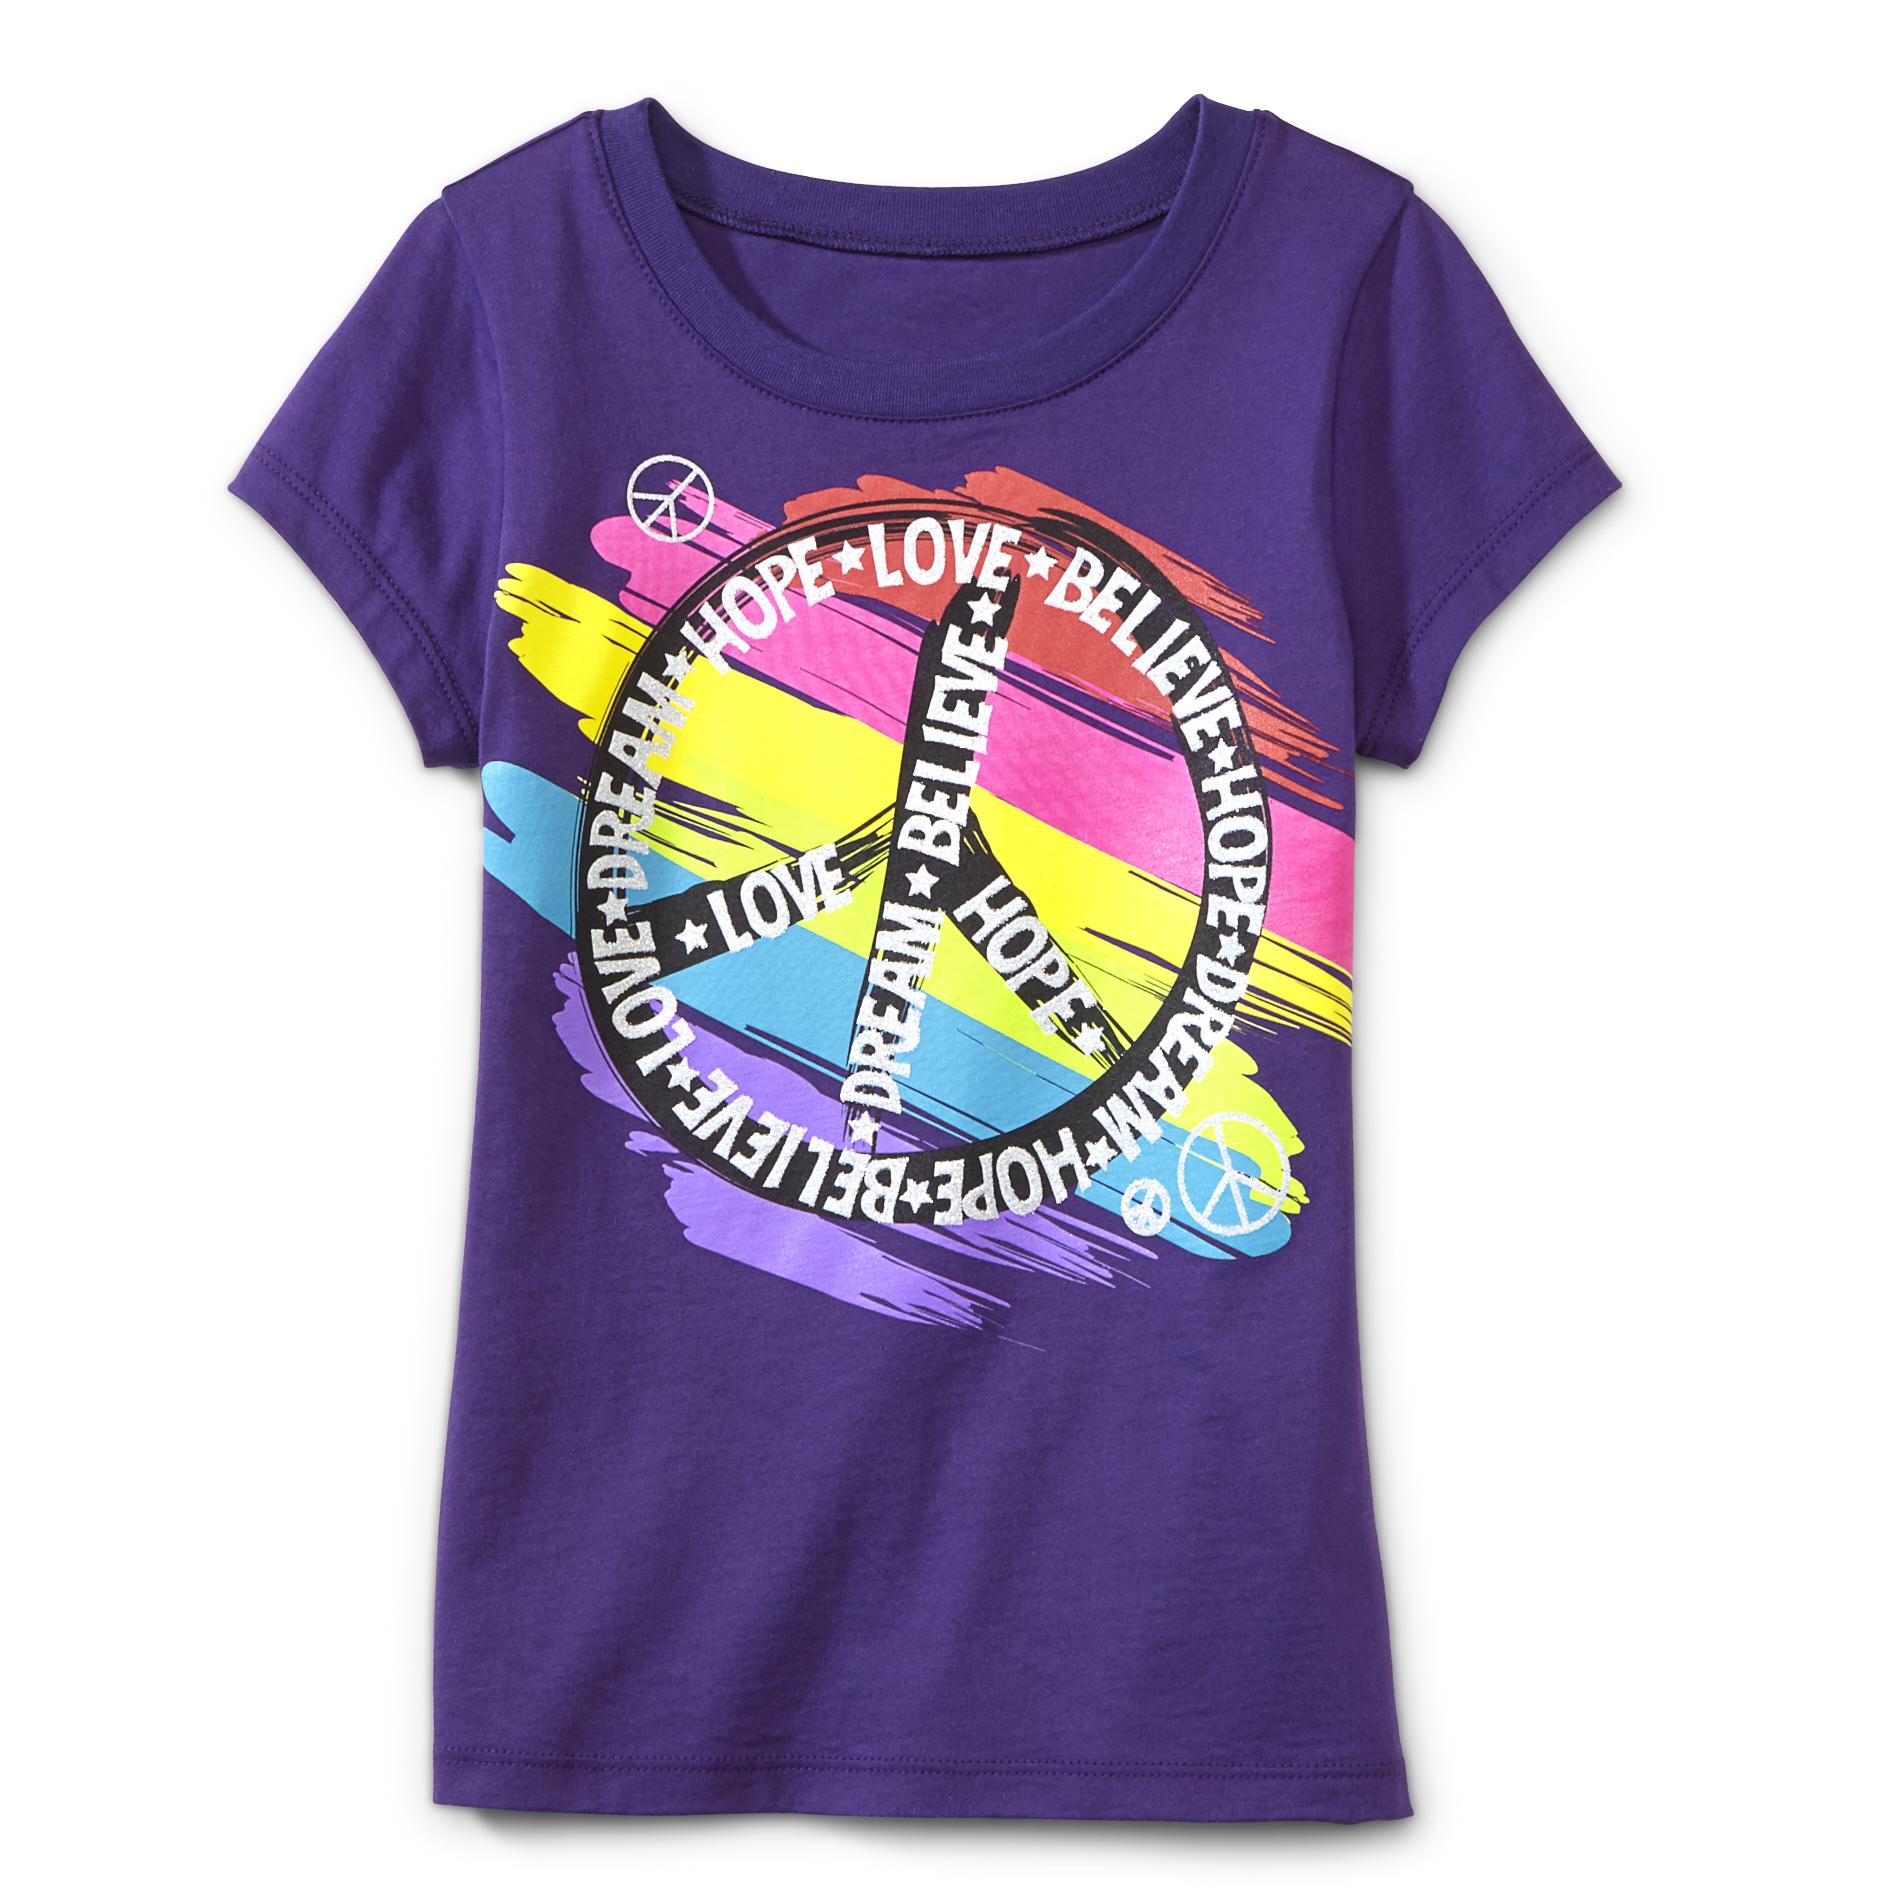 Route 66 Girl's Graphic T-Shirt - Peace Sign